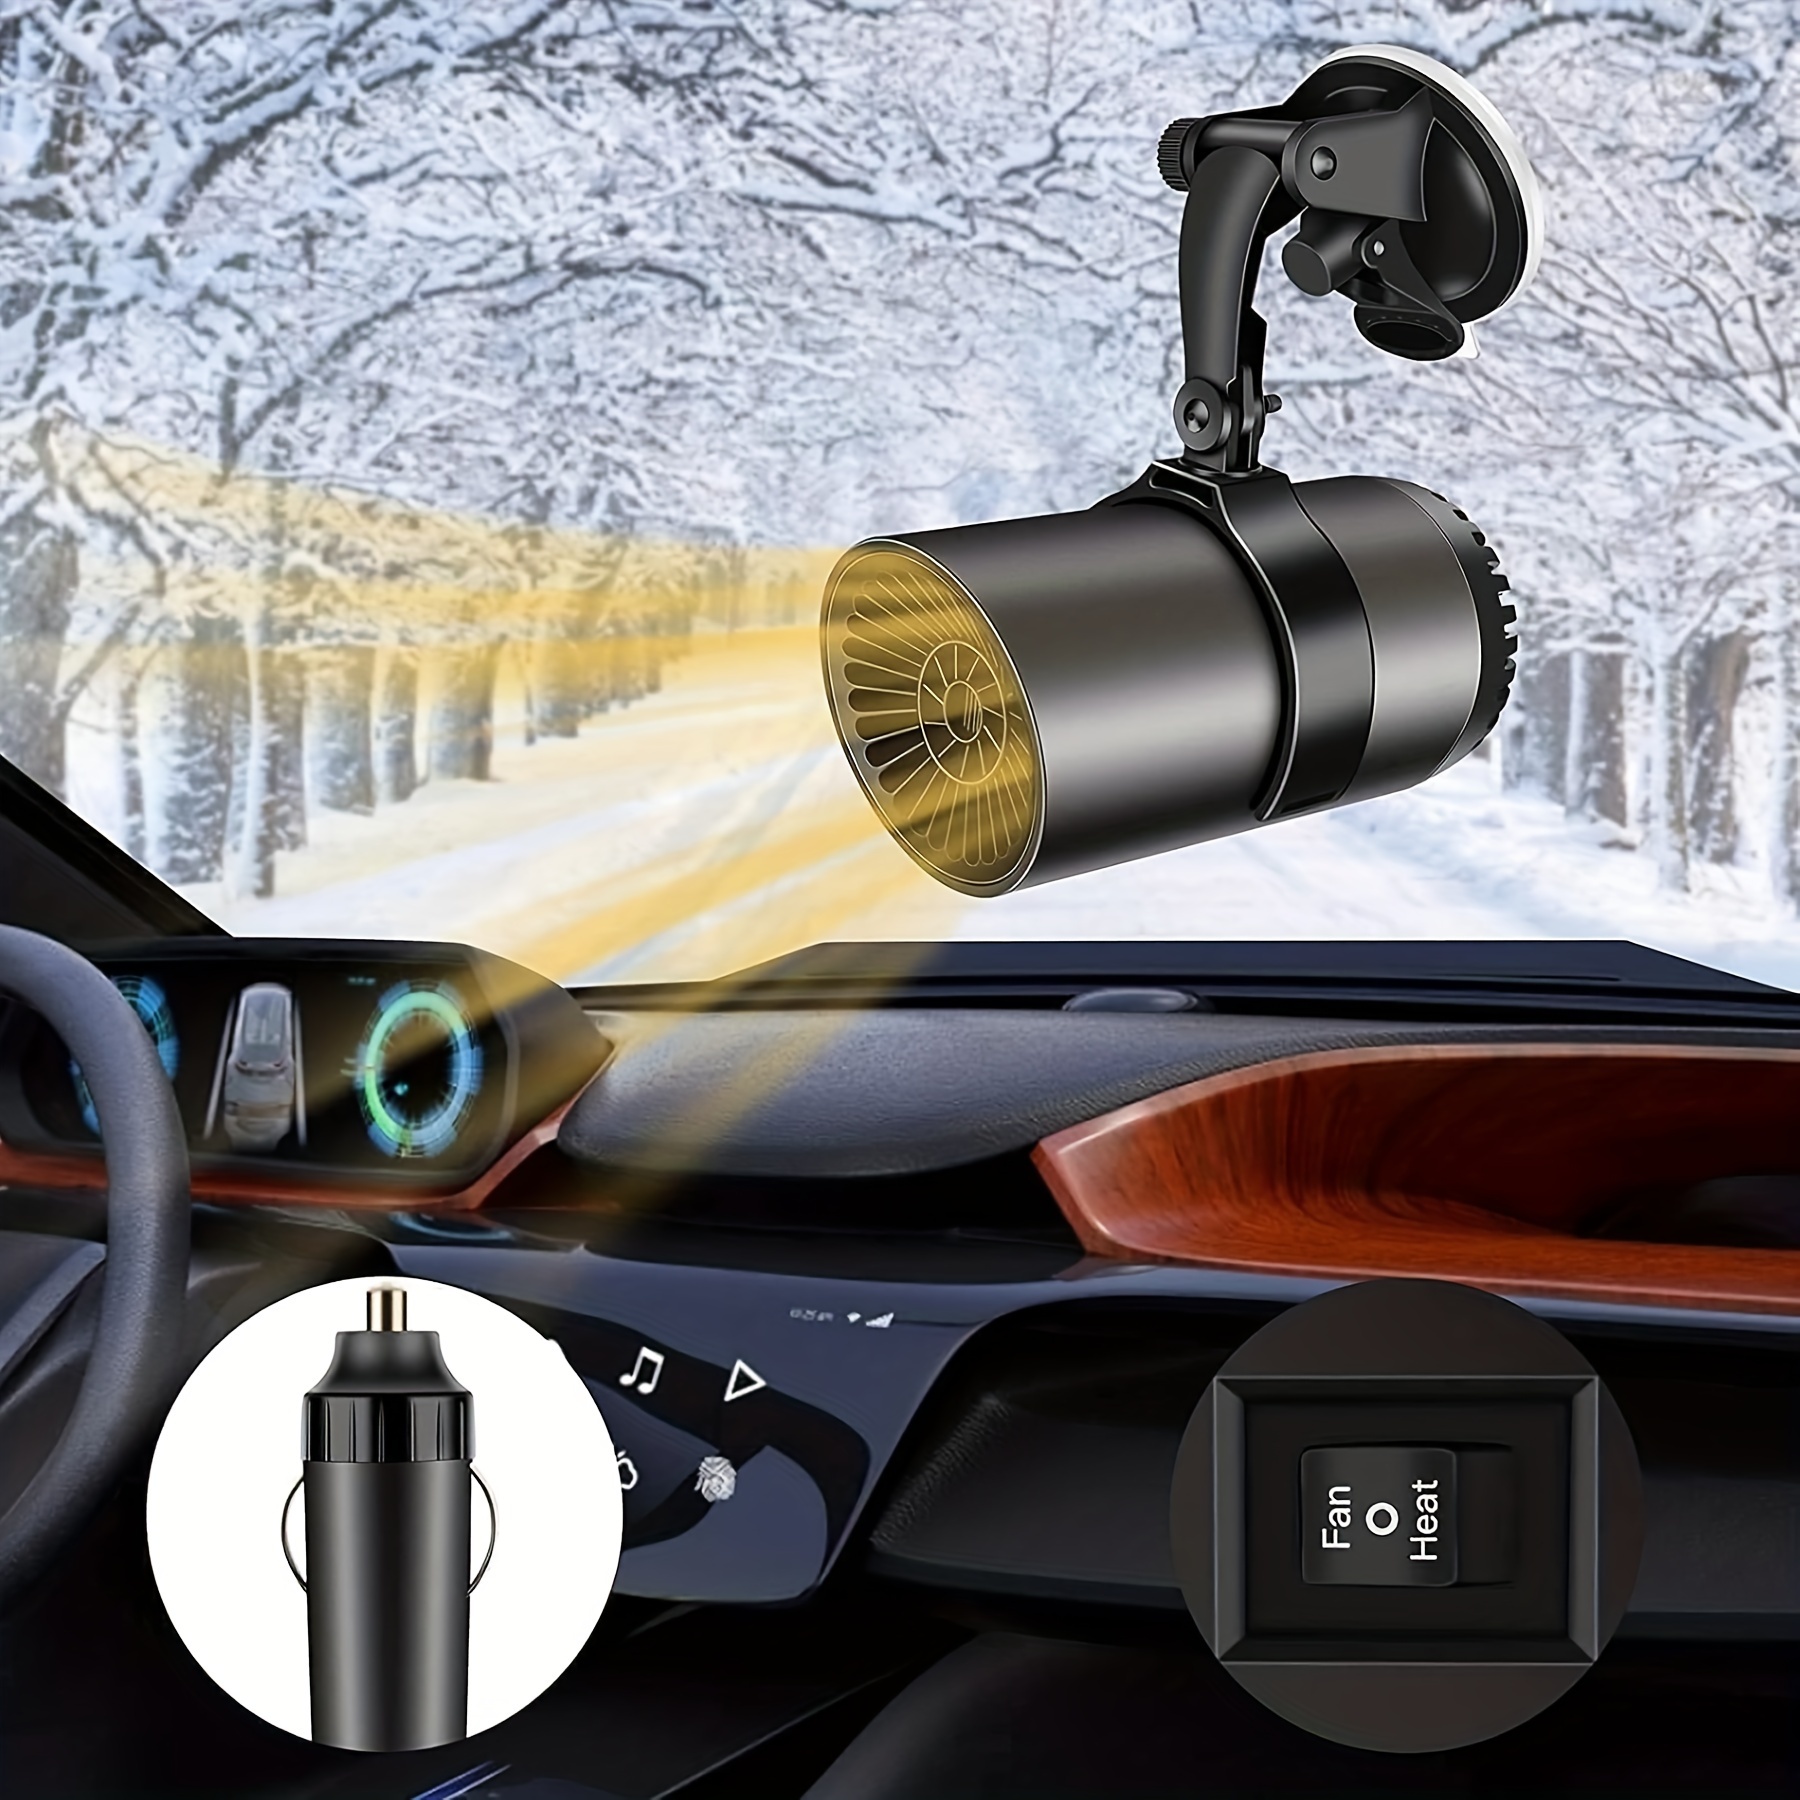 Cheap Automotive Car Heaters Windshield Defroster Kinetic Heater for Car  Mini Portable Kinetic Molecular Auto winter Accessories